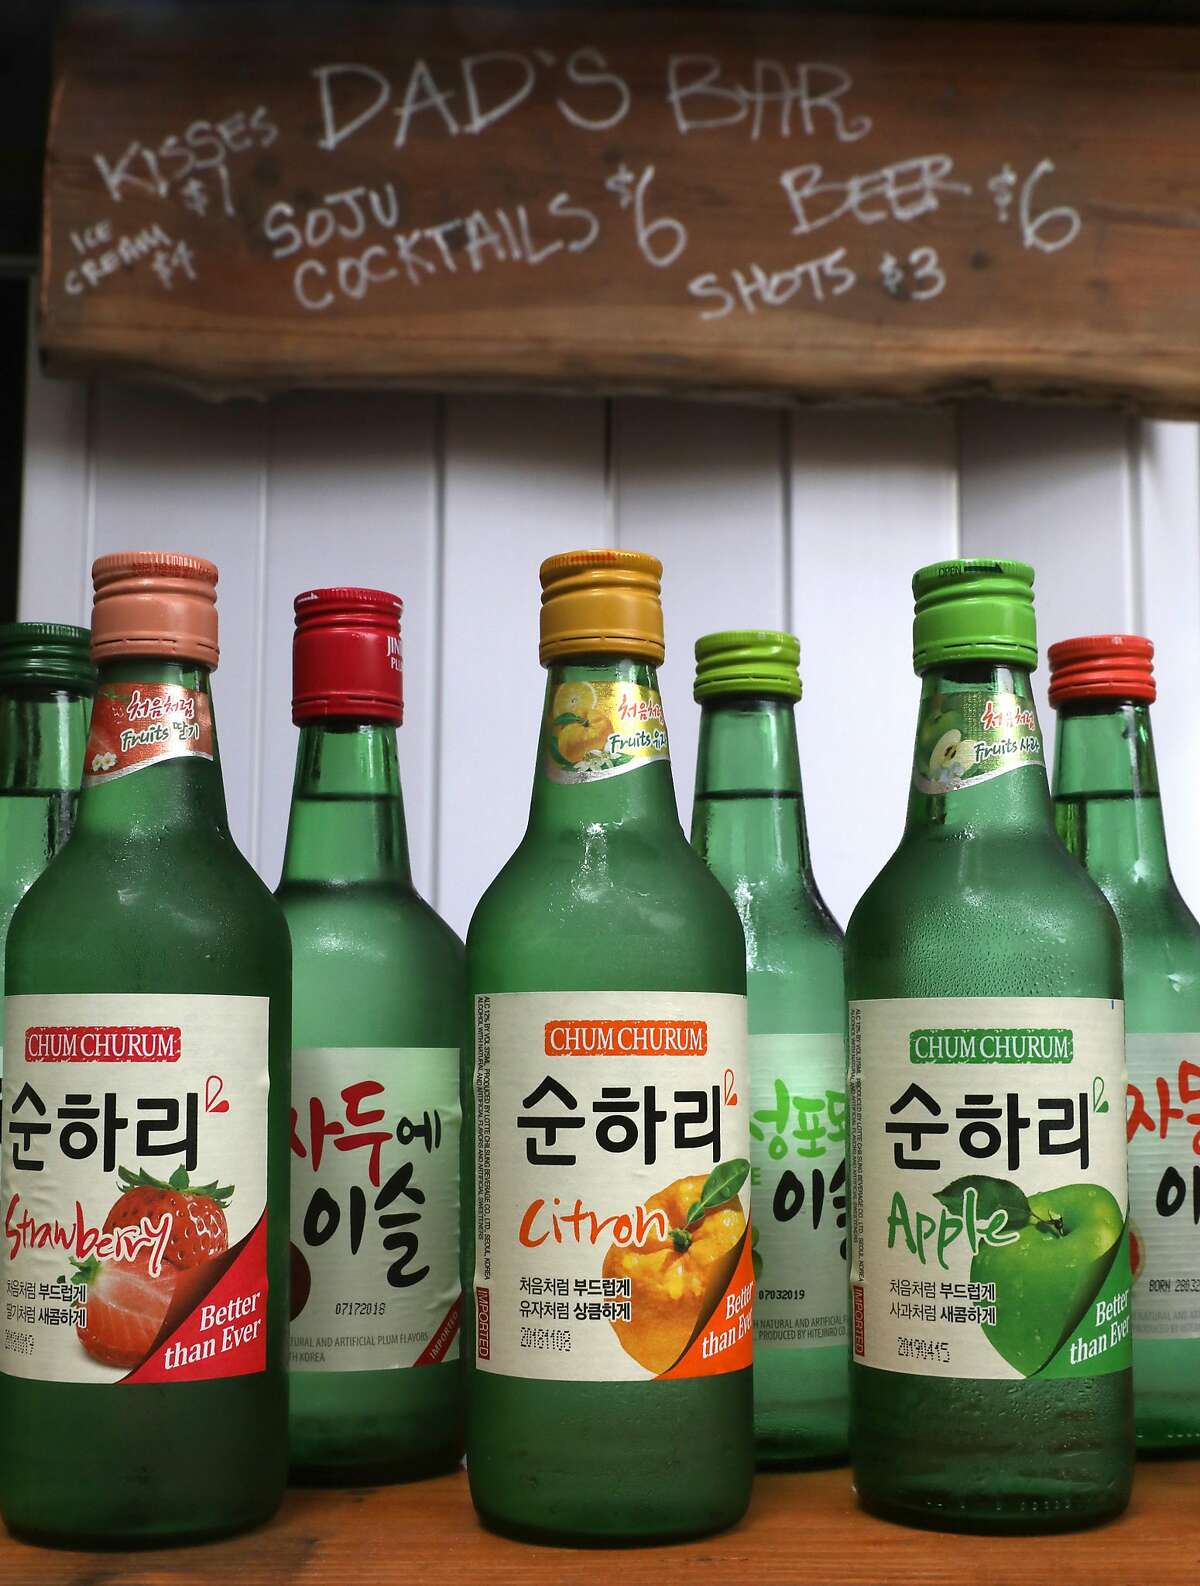 Fruit flavored soju, a very popular spirit in Korea, seen at Um.ma, Chris Oh's restaurant in the Sunset on Friday, July 26, 2019 in San Francisco, Calif.